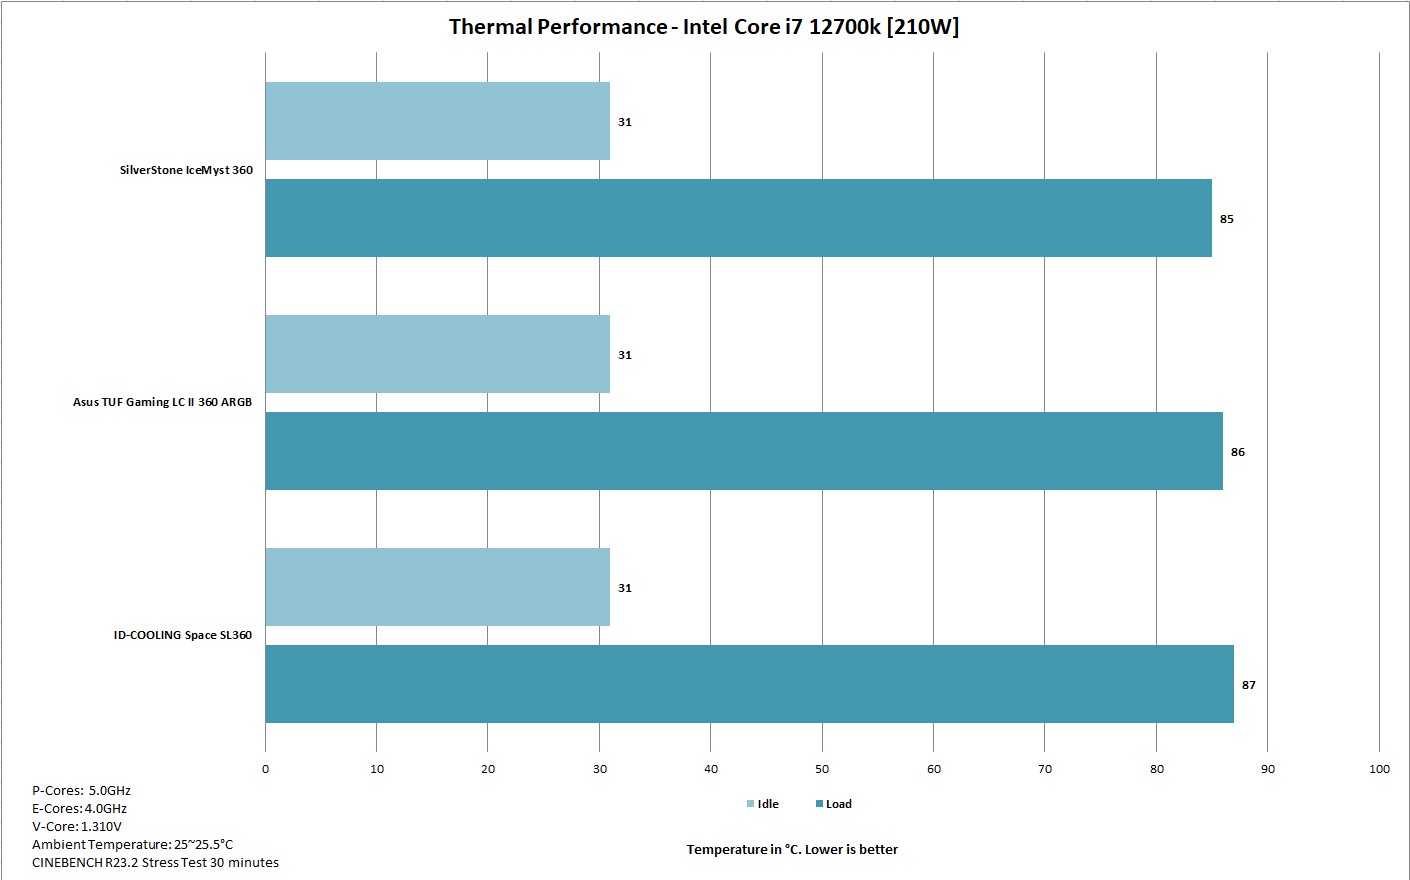 SilverStone IceMyst 360 Thermal Performance 220W